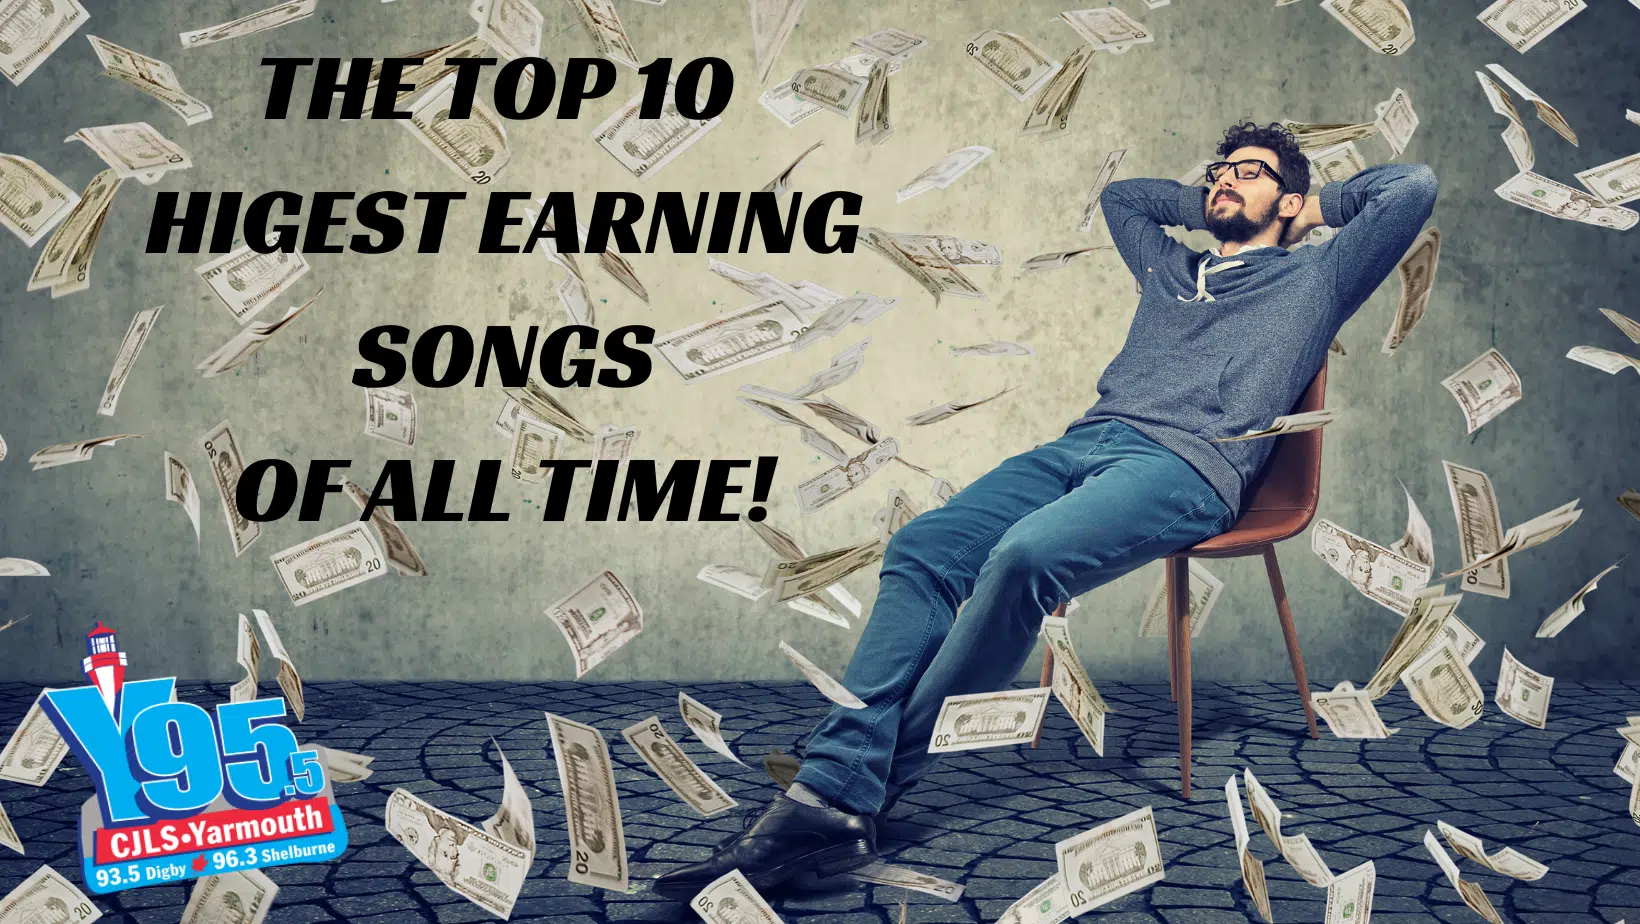 What Are The Top 10 Highest Earning Songs Of All Time?